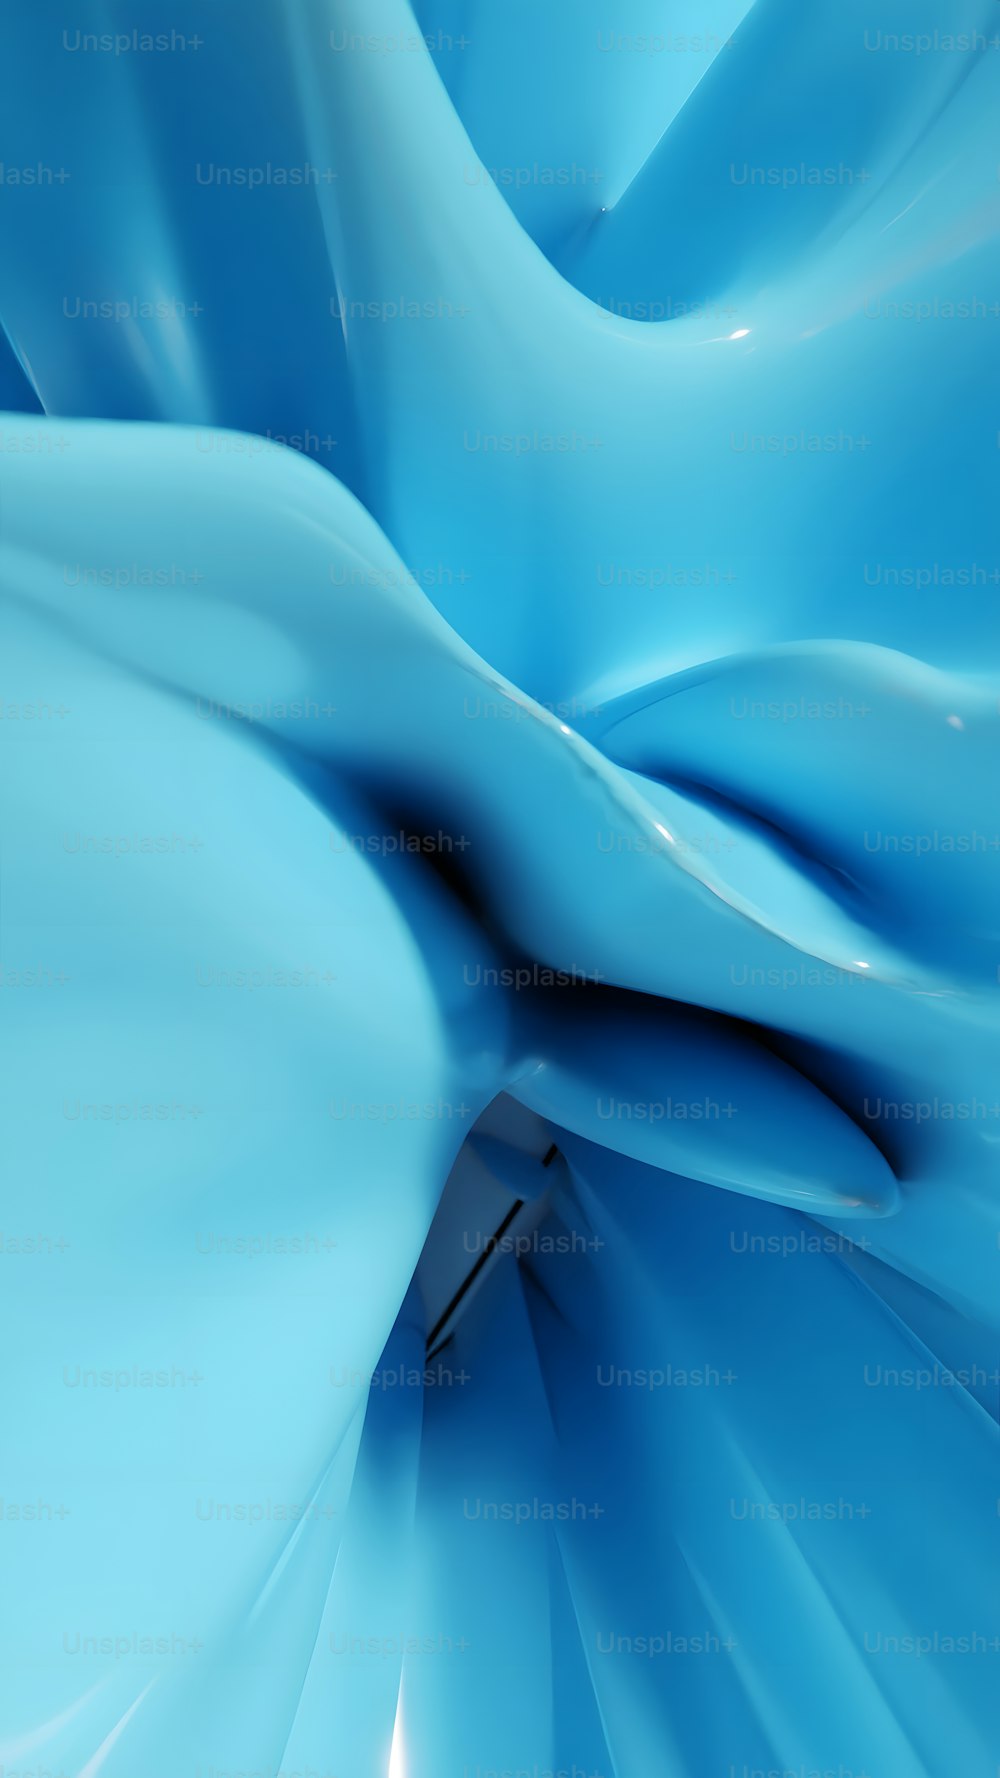 a blue abstract background with a curved design